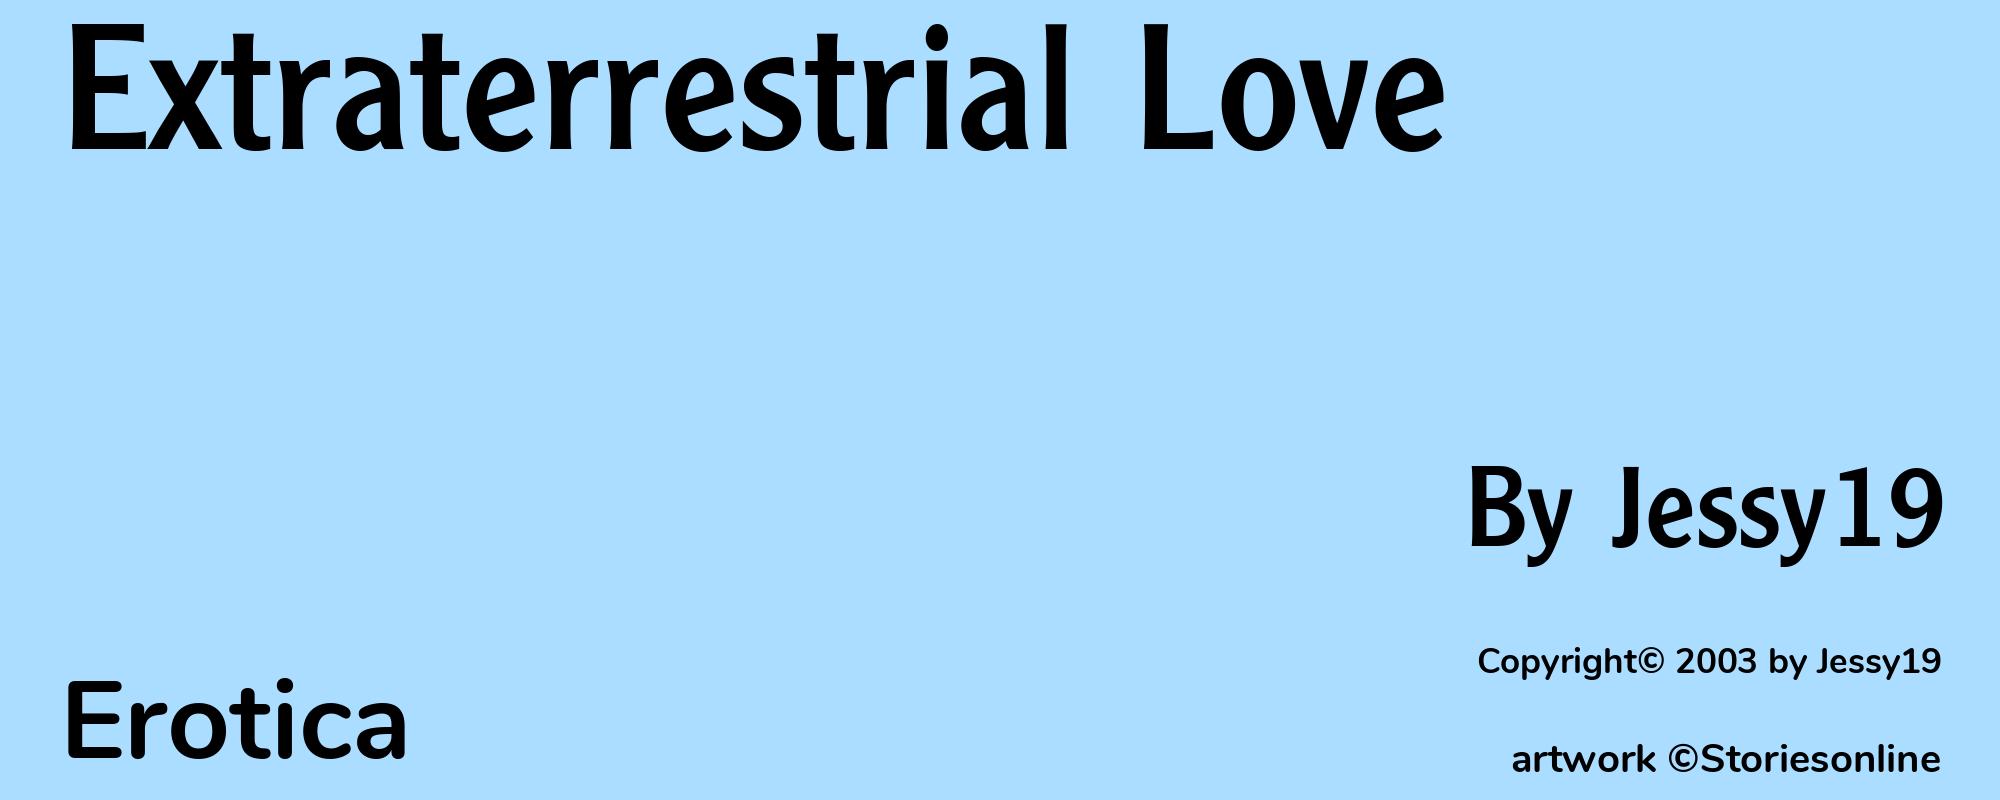 Extraterrestrial Love - Cover